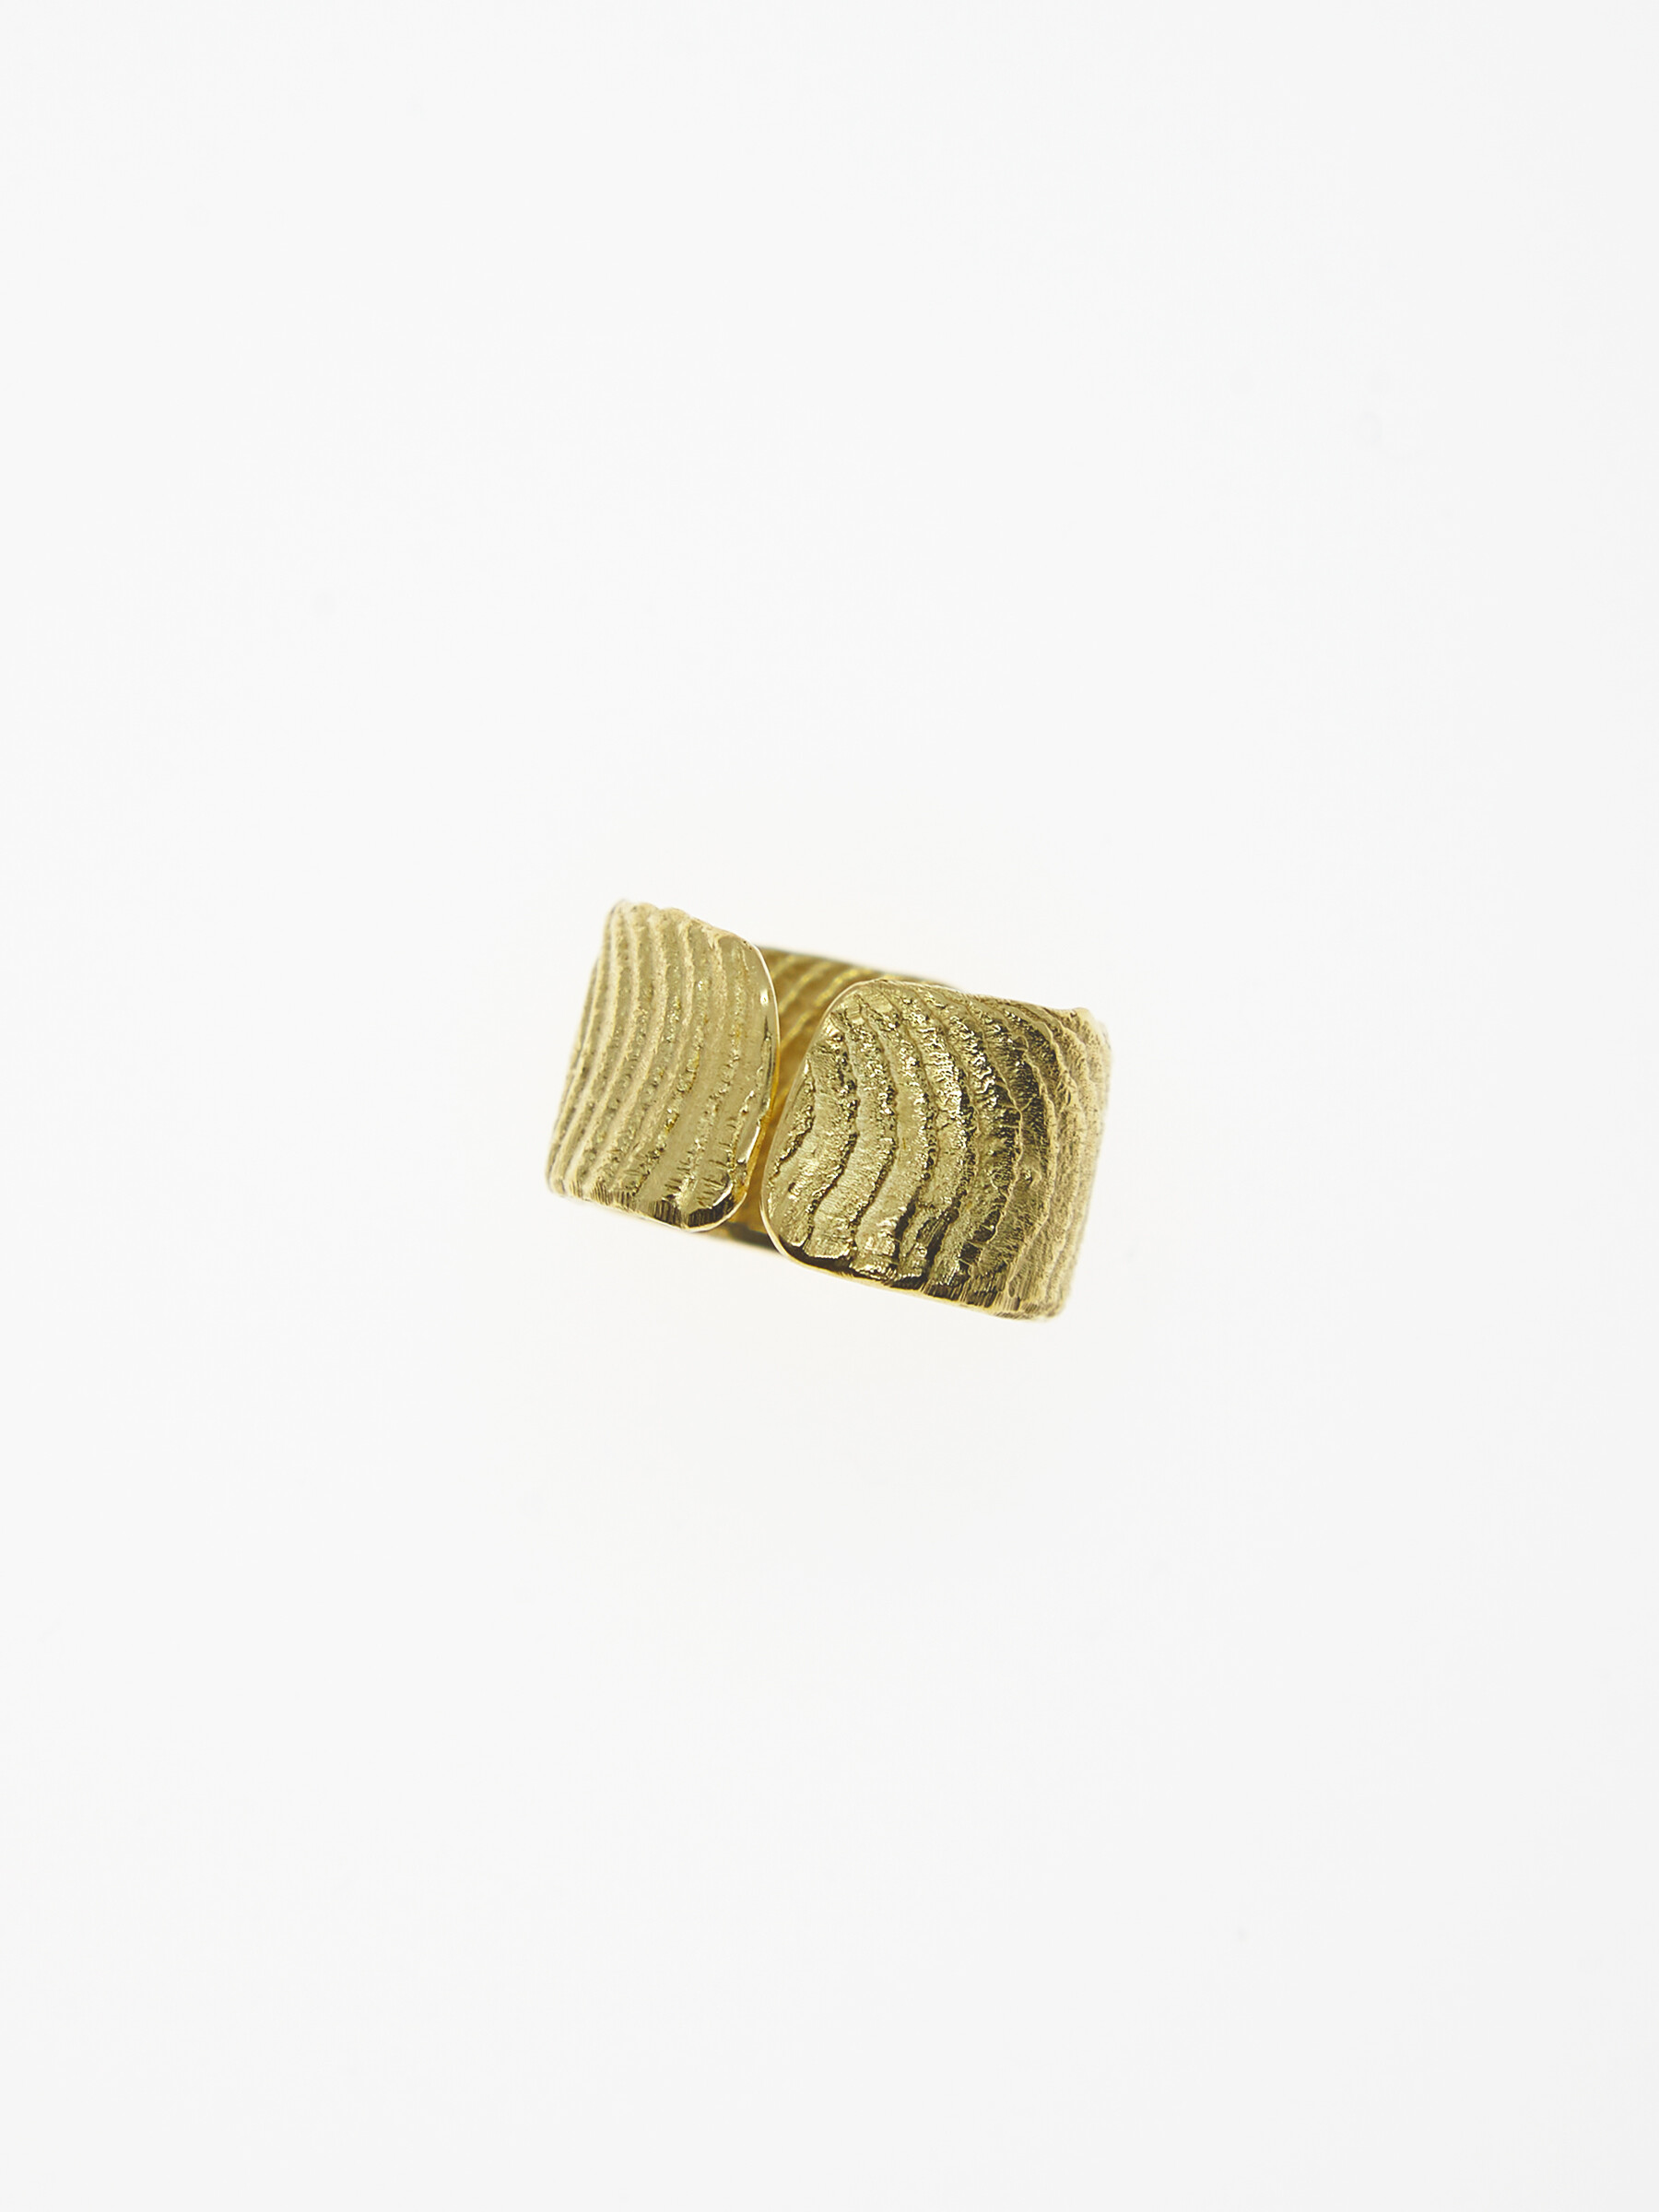 ArtStation - Gold-plated wrap ring (London, 2019)